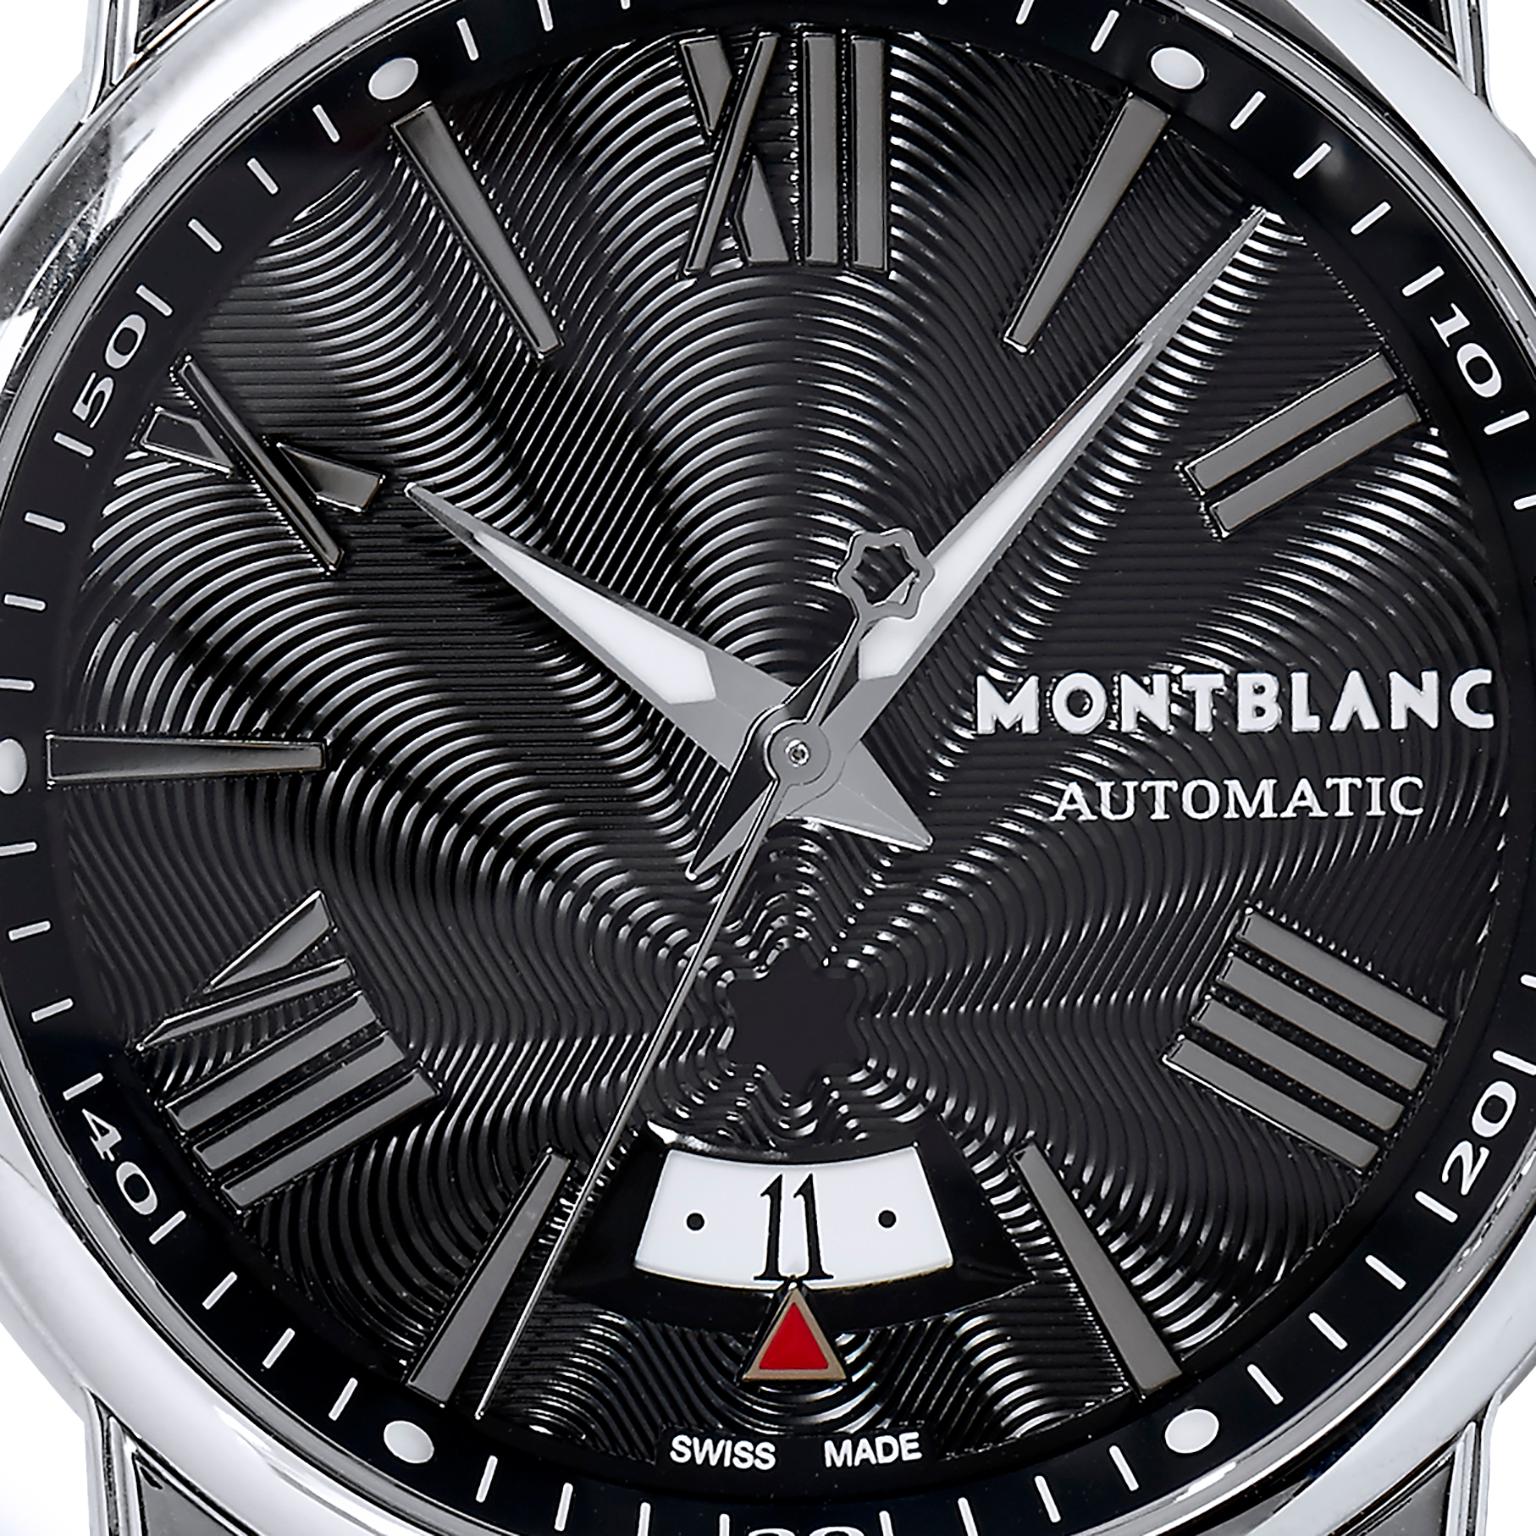 41.5mm stainless steel case, sapphire crystal back, non-screw crown with 1 o-ring, domed sapphire crystal with anti-reflective coating, black guilloché dial, automatic Montblanc movement, approximately 42 hours of power reserve with triple-folding